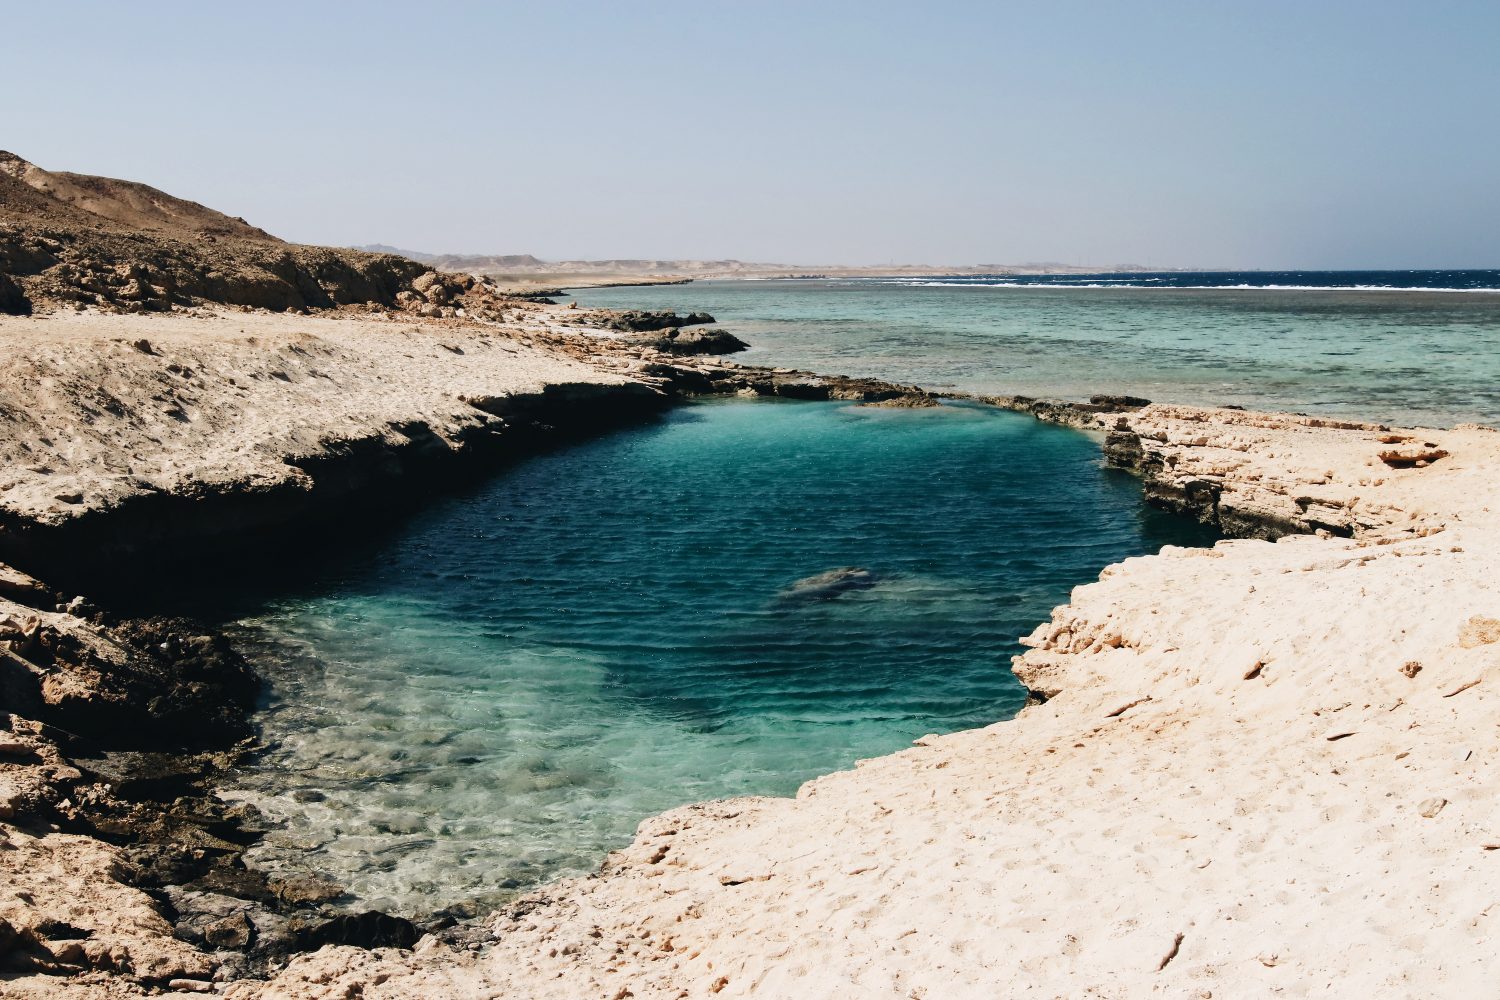 The locals say that many moons ago, a meteor once hit this coast and formed this natural rock pool in its wake. Now it’s filled with the most turquoise ocean water from the Red Sea… Truly a hidden gem in Marsa Alam, and of course, Al-Nayzak means ‘shooting star’ 💫